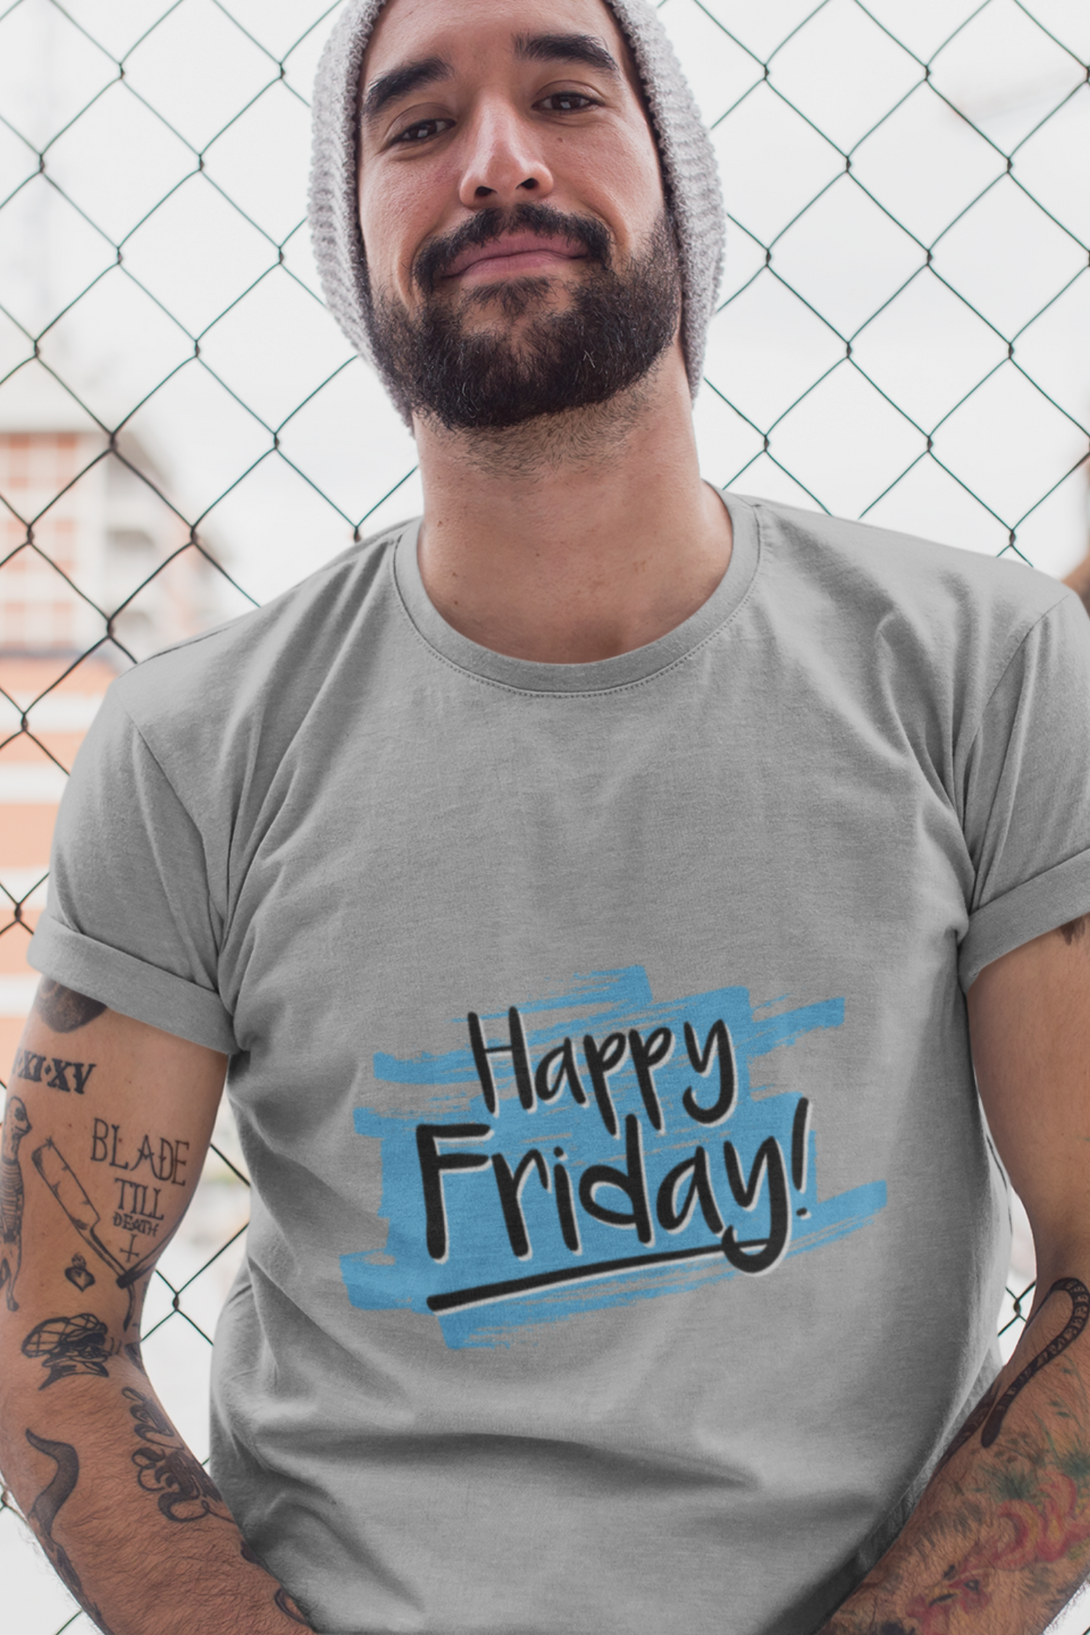 Happy Friday Printed T-Shirt For Men - WowWaves - 5